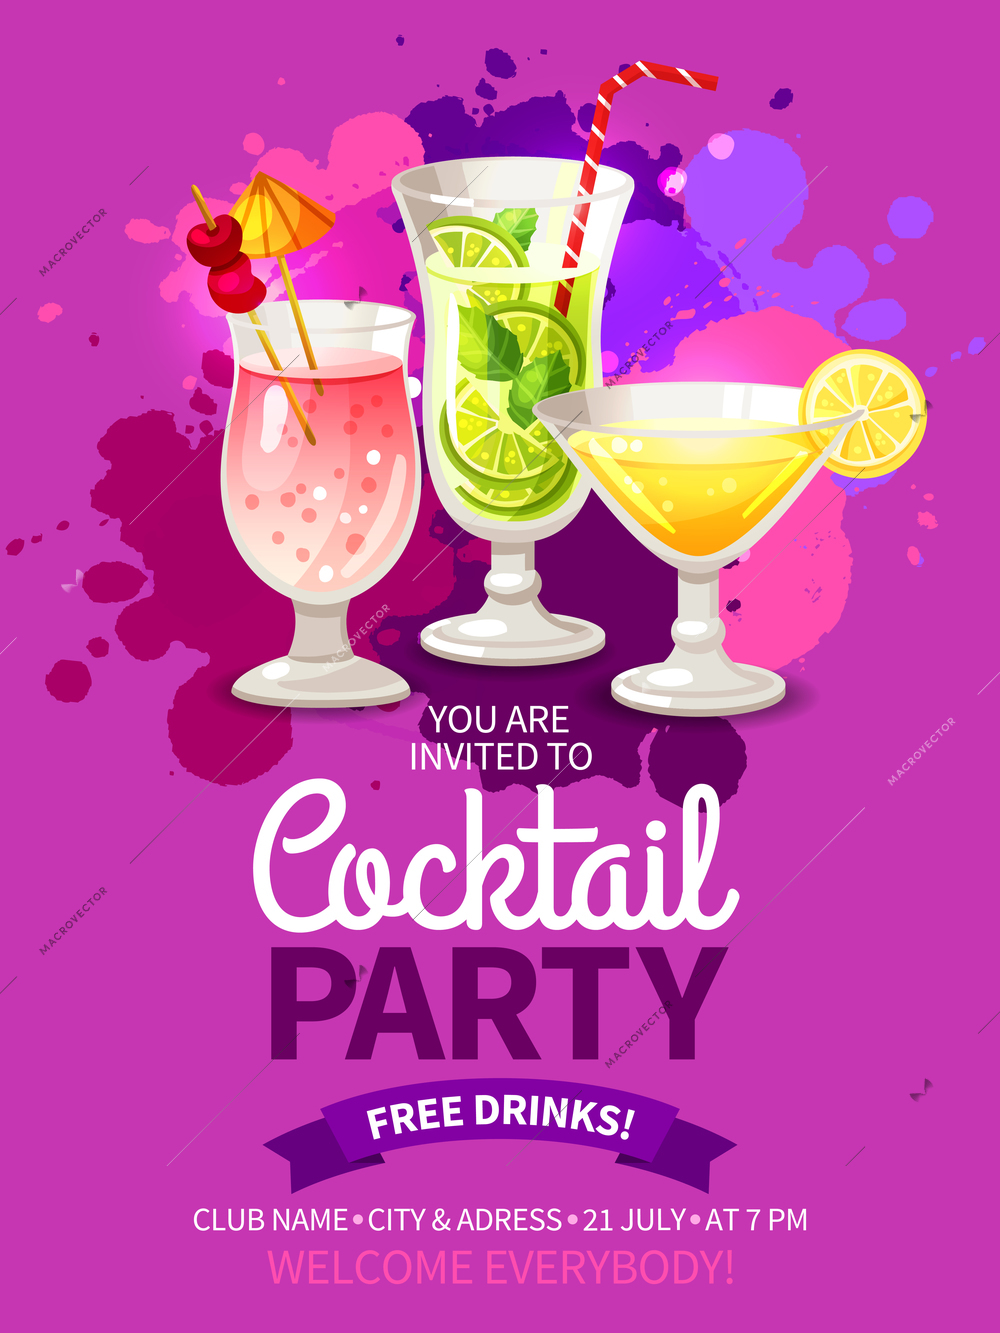 Bright color flyer for invitation to night club cocktail summer party vector illustration